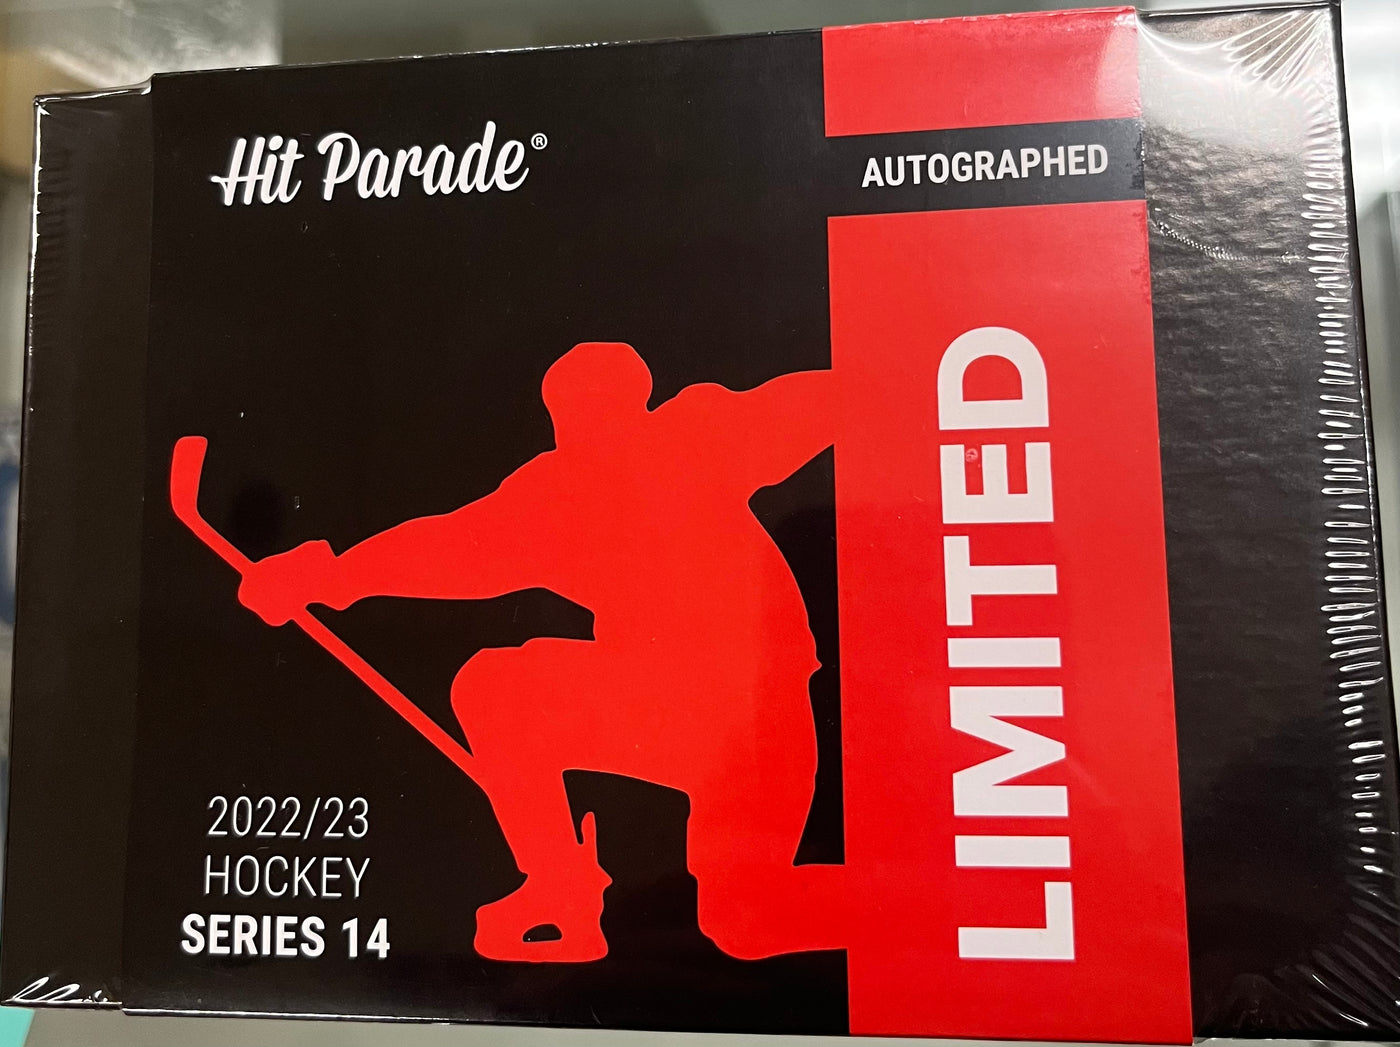 2022/23 Hit Parade Autographed Hockey Series 14 Edition